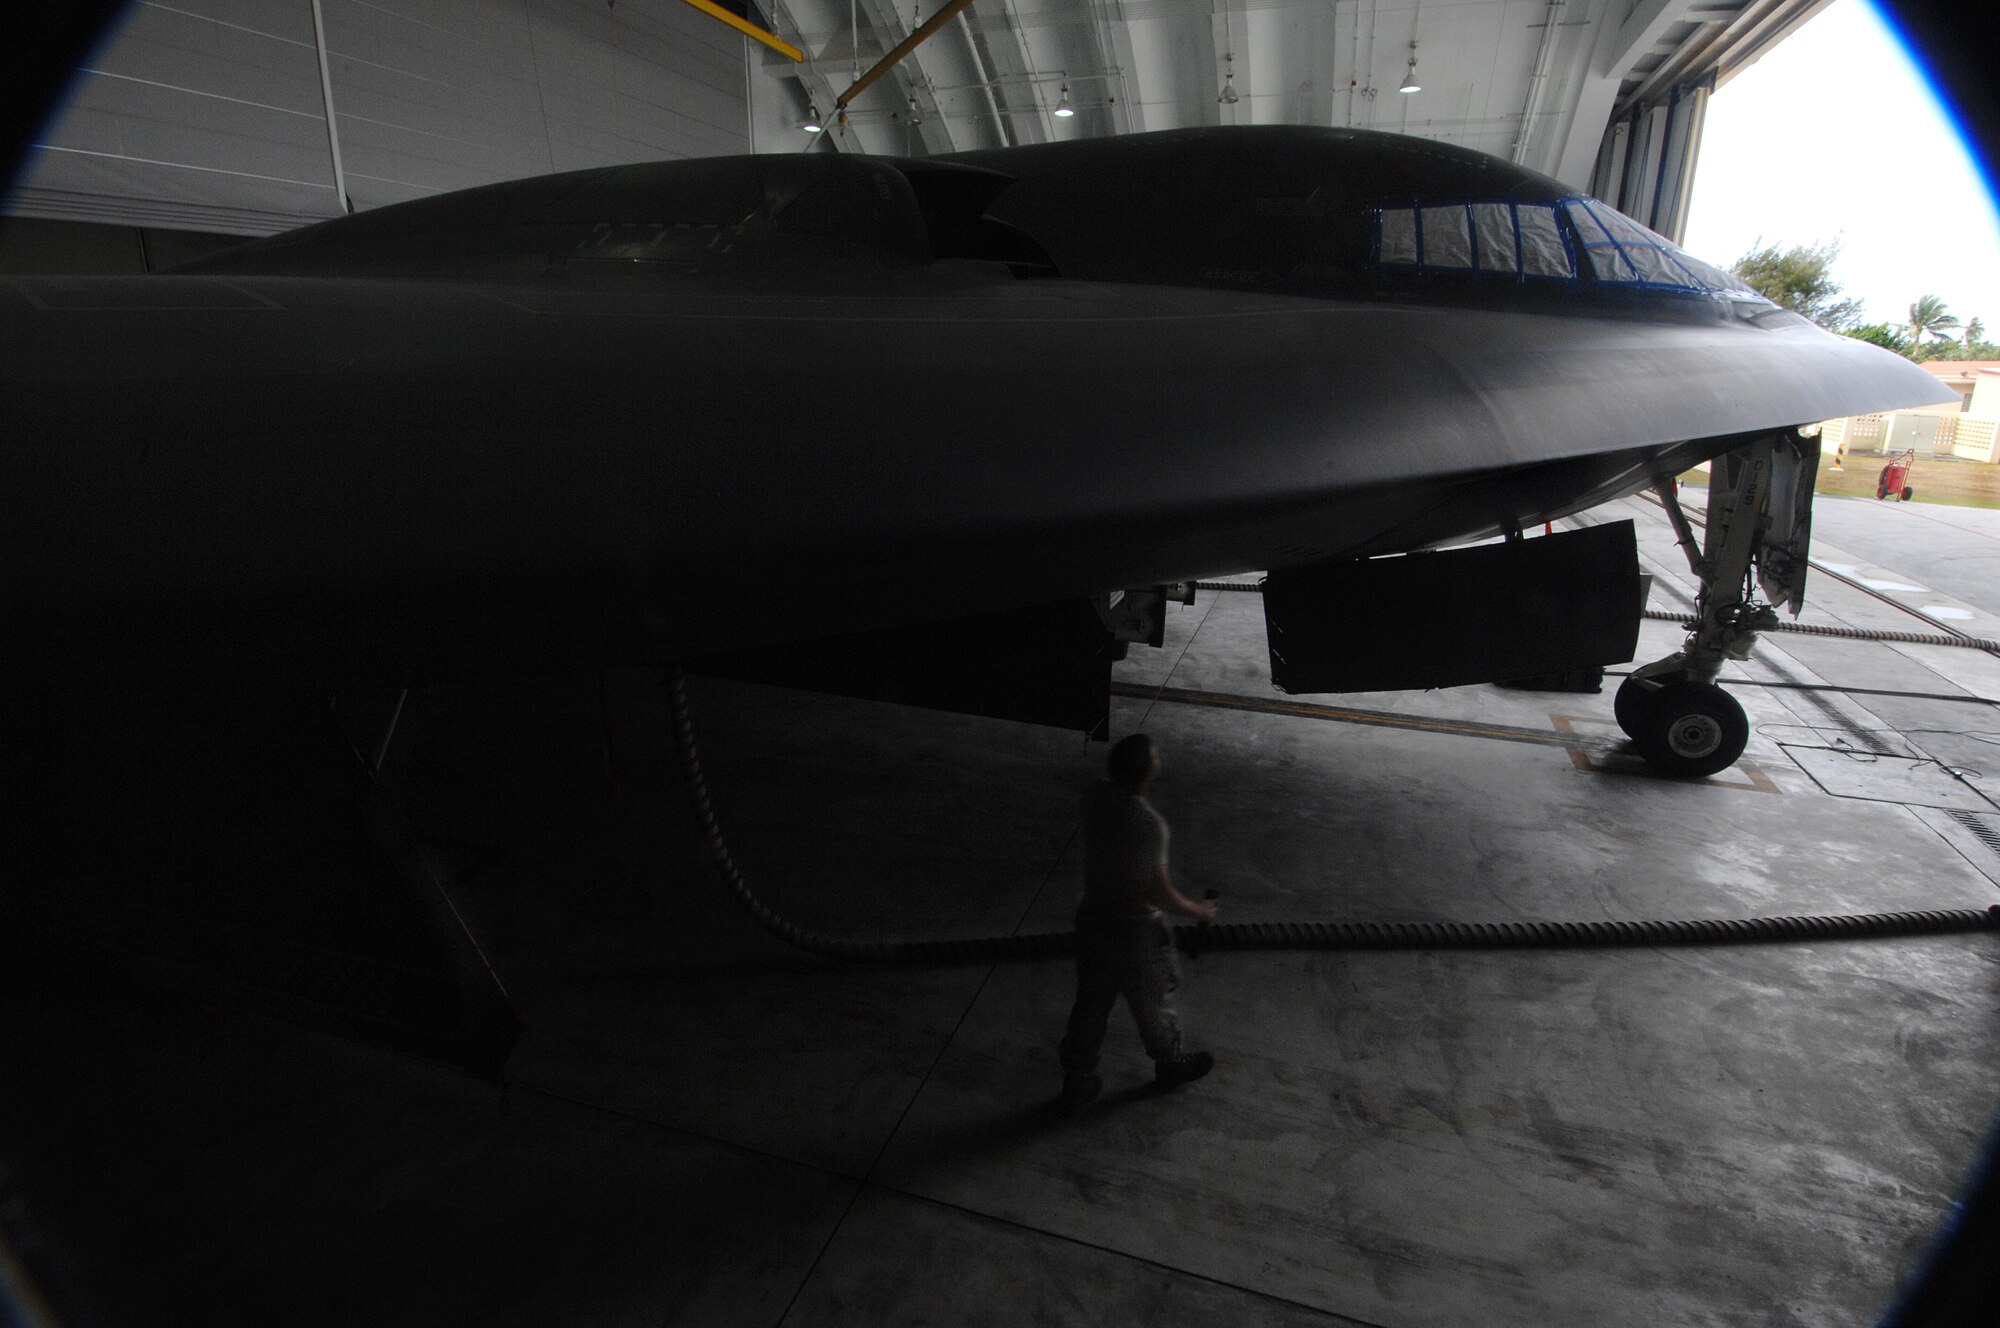 ANDERSEN AIR FORCE BASE, Guam -- Staff Sergeant Scott Kures walk around a wing to check for leaking drains as part of routine pre-flight maintenance on a B-2 Spirit stealth bomber. Sergeant Kures is part of a maintenance team supporting the remaining B-2 Spirits at Andersen AFB. Keeping the B-2 Spirit bomber at a mission-ready status requires lots of hard work and a huge team effort by all maintainers working on the multi-role stealth bomber. The B-2s here have remained suspended pending the results from a safety investigation board following the first-ever crash of a stealth bomber Feb. 23 here, at Andersen AFB. The continuous bomber presence demonstrates U.S. commitment to promote security and stability in the Pacific region. Sergeant Kures is with the 36th Expeditionary Aircraft Maintenance Squadron and is deployed from the 509th Bomb Wing, Whiteman, AFB, Mo. (U.S. Air Force photo by Staff Sgt. Vanessa Valentine)
